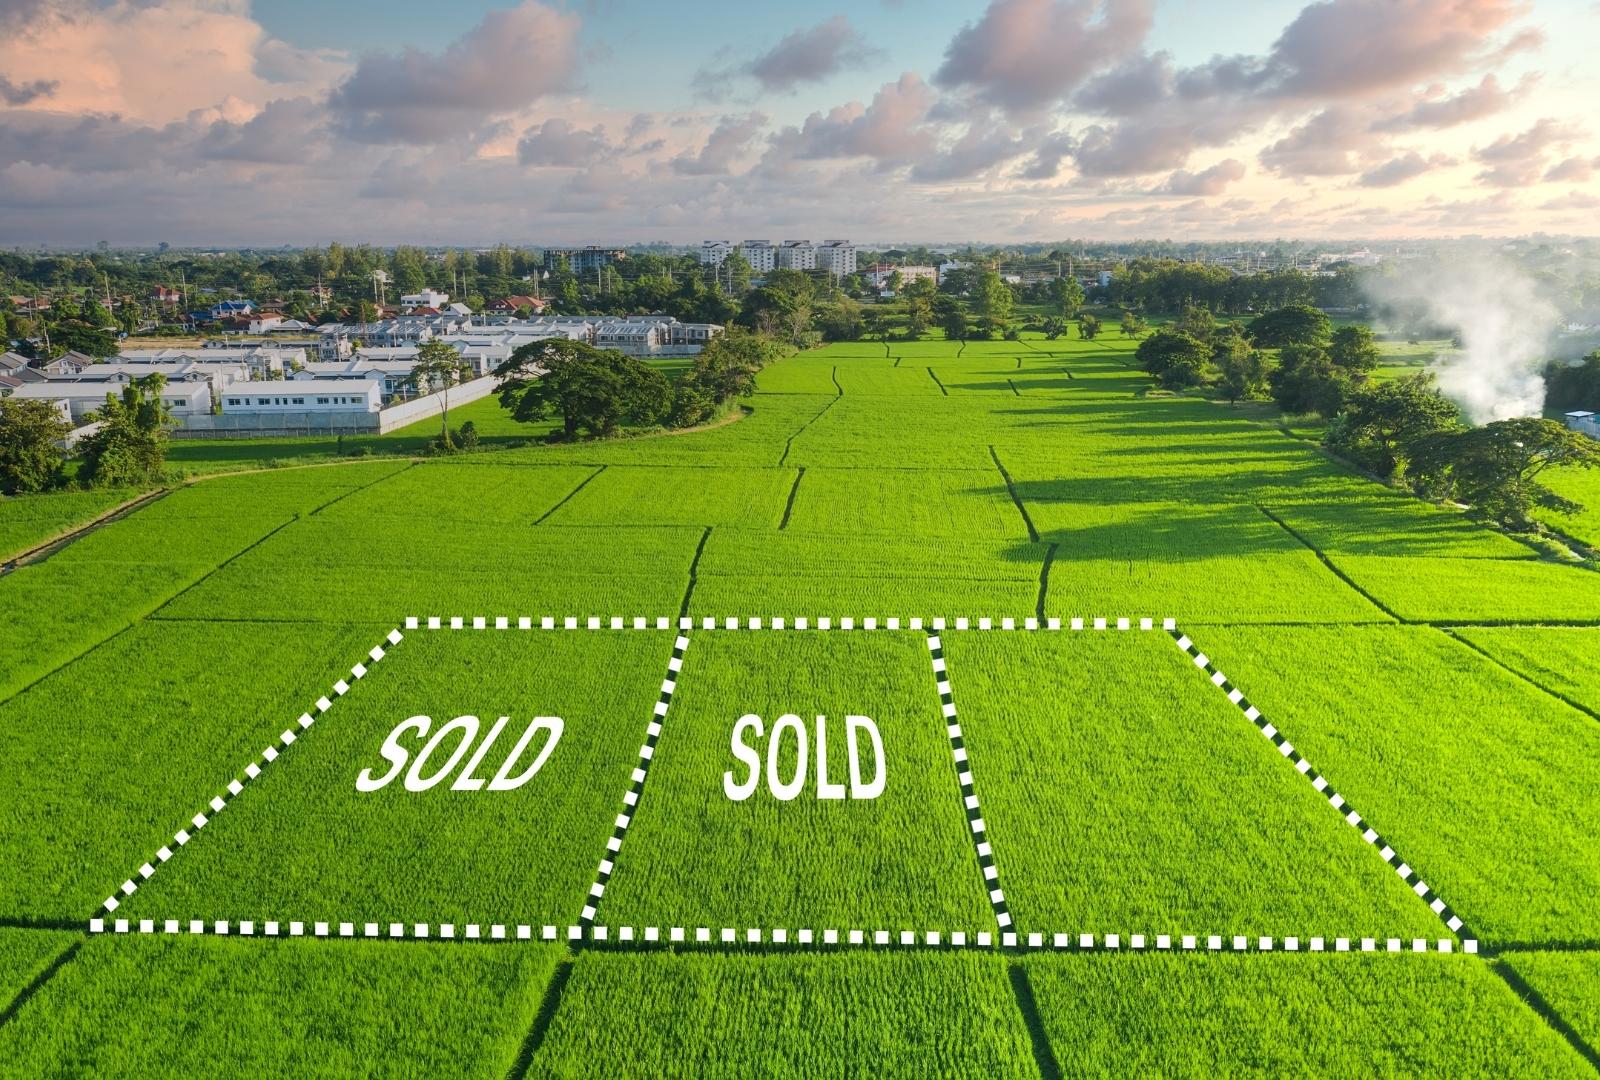 Land sales and GST